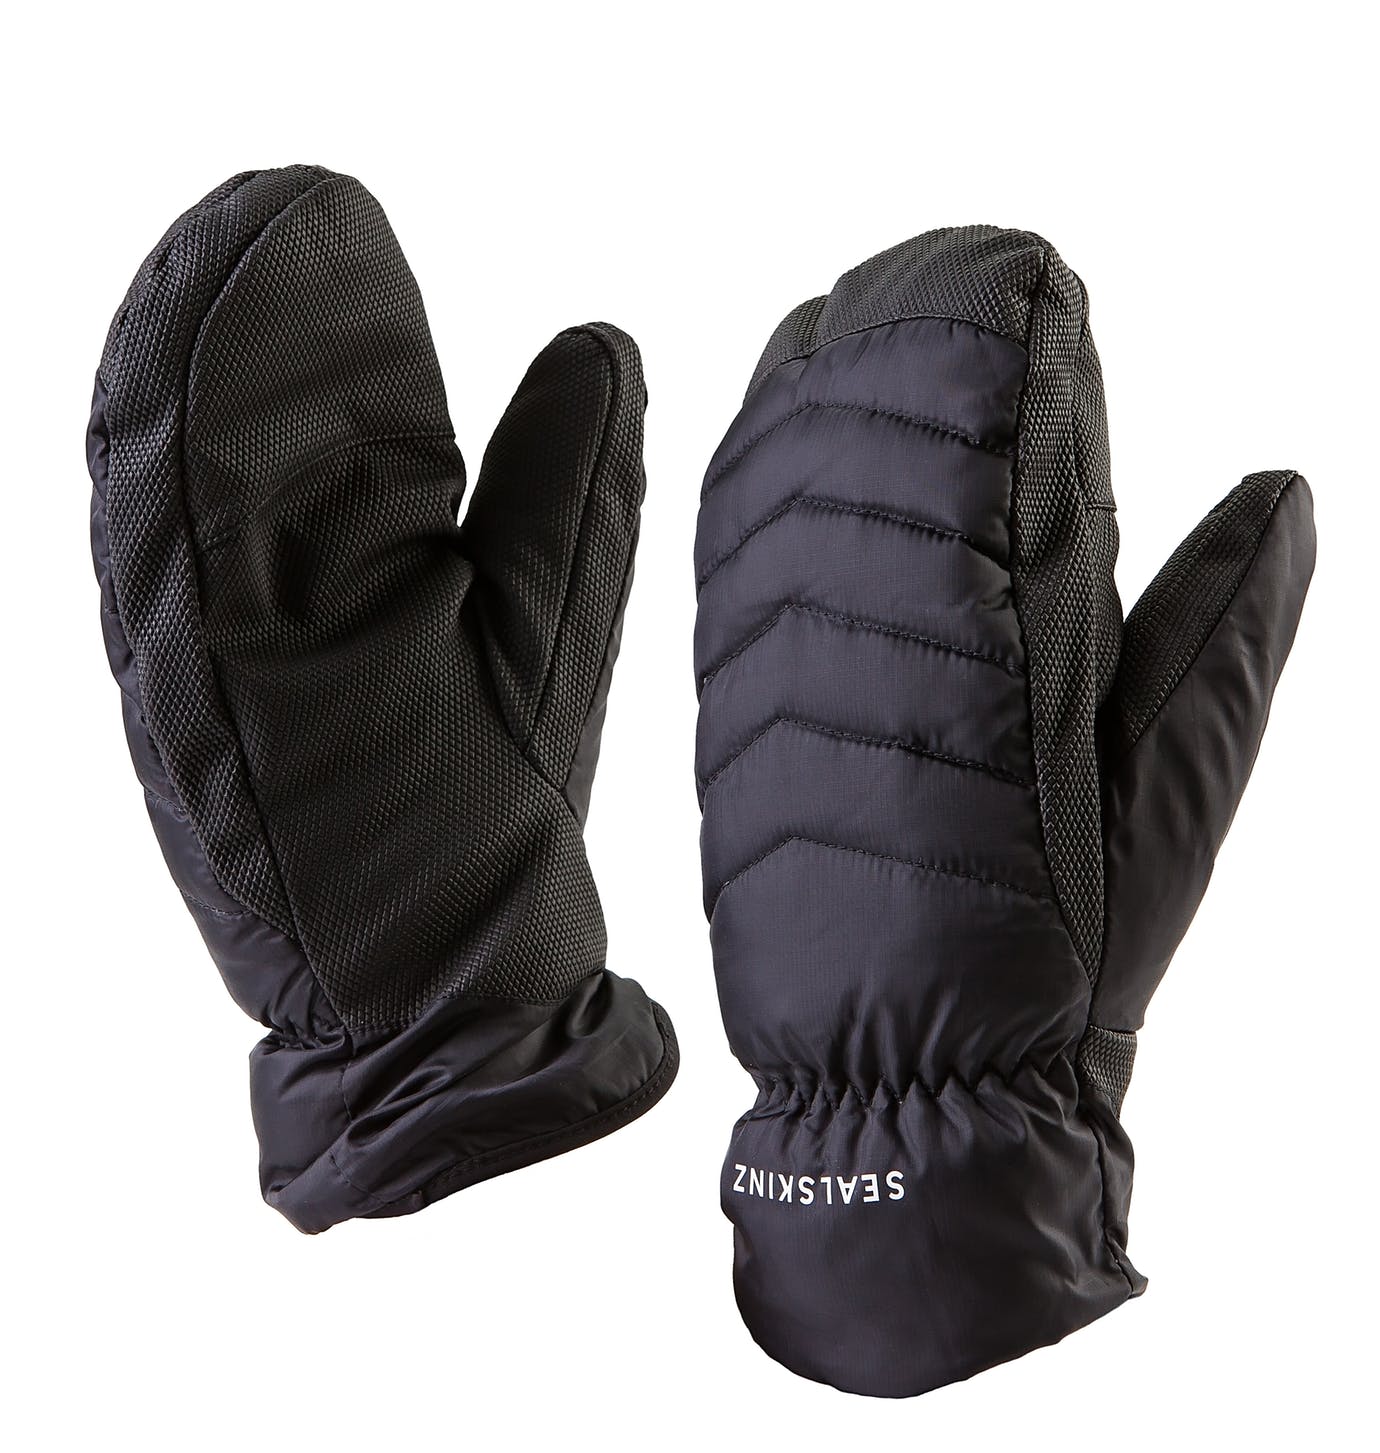 Buy Sealskinz Extreme Cold Weather Down Mitten from Outnorth